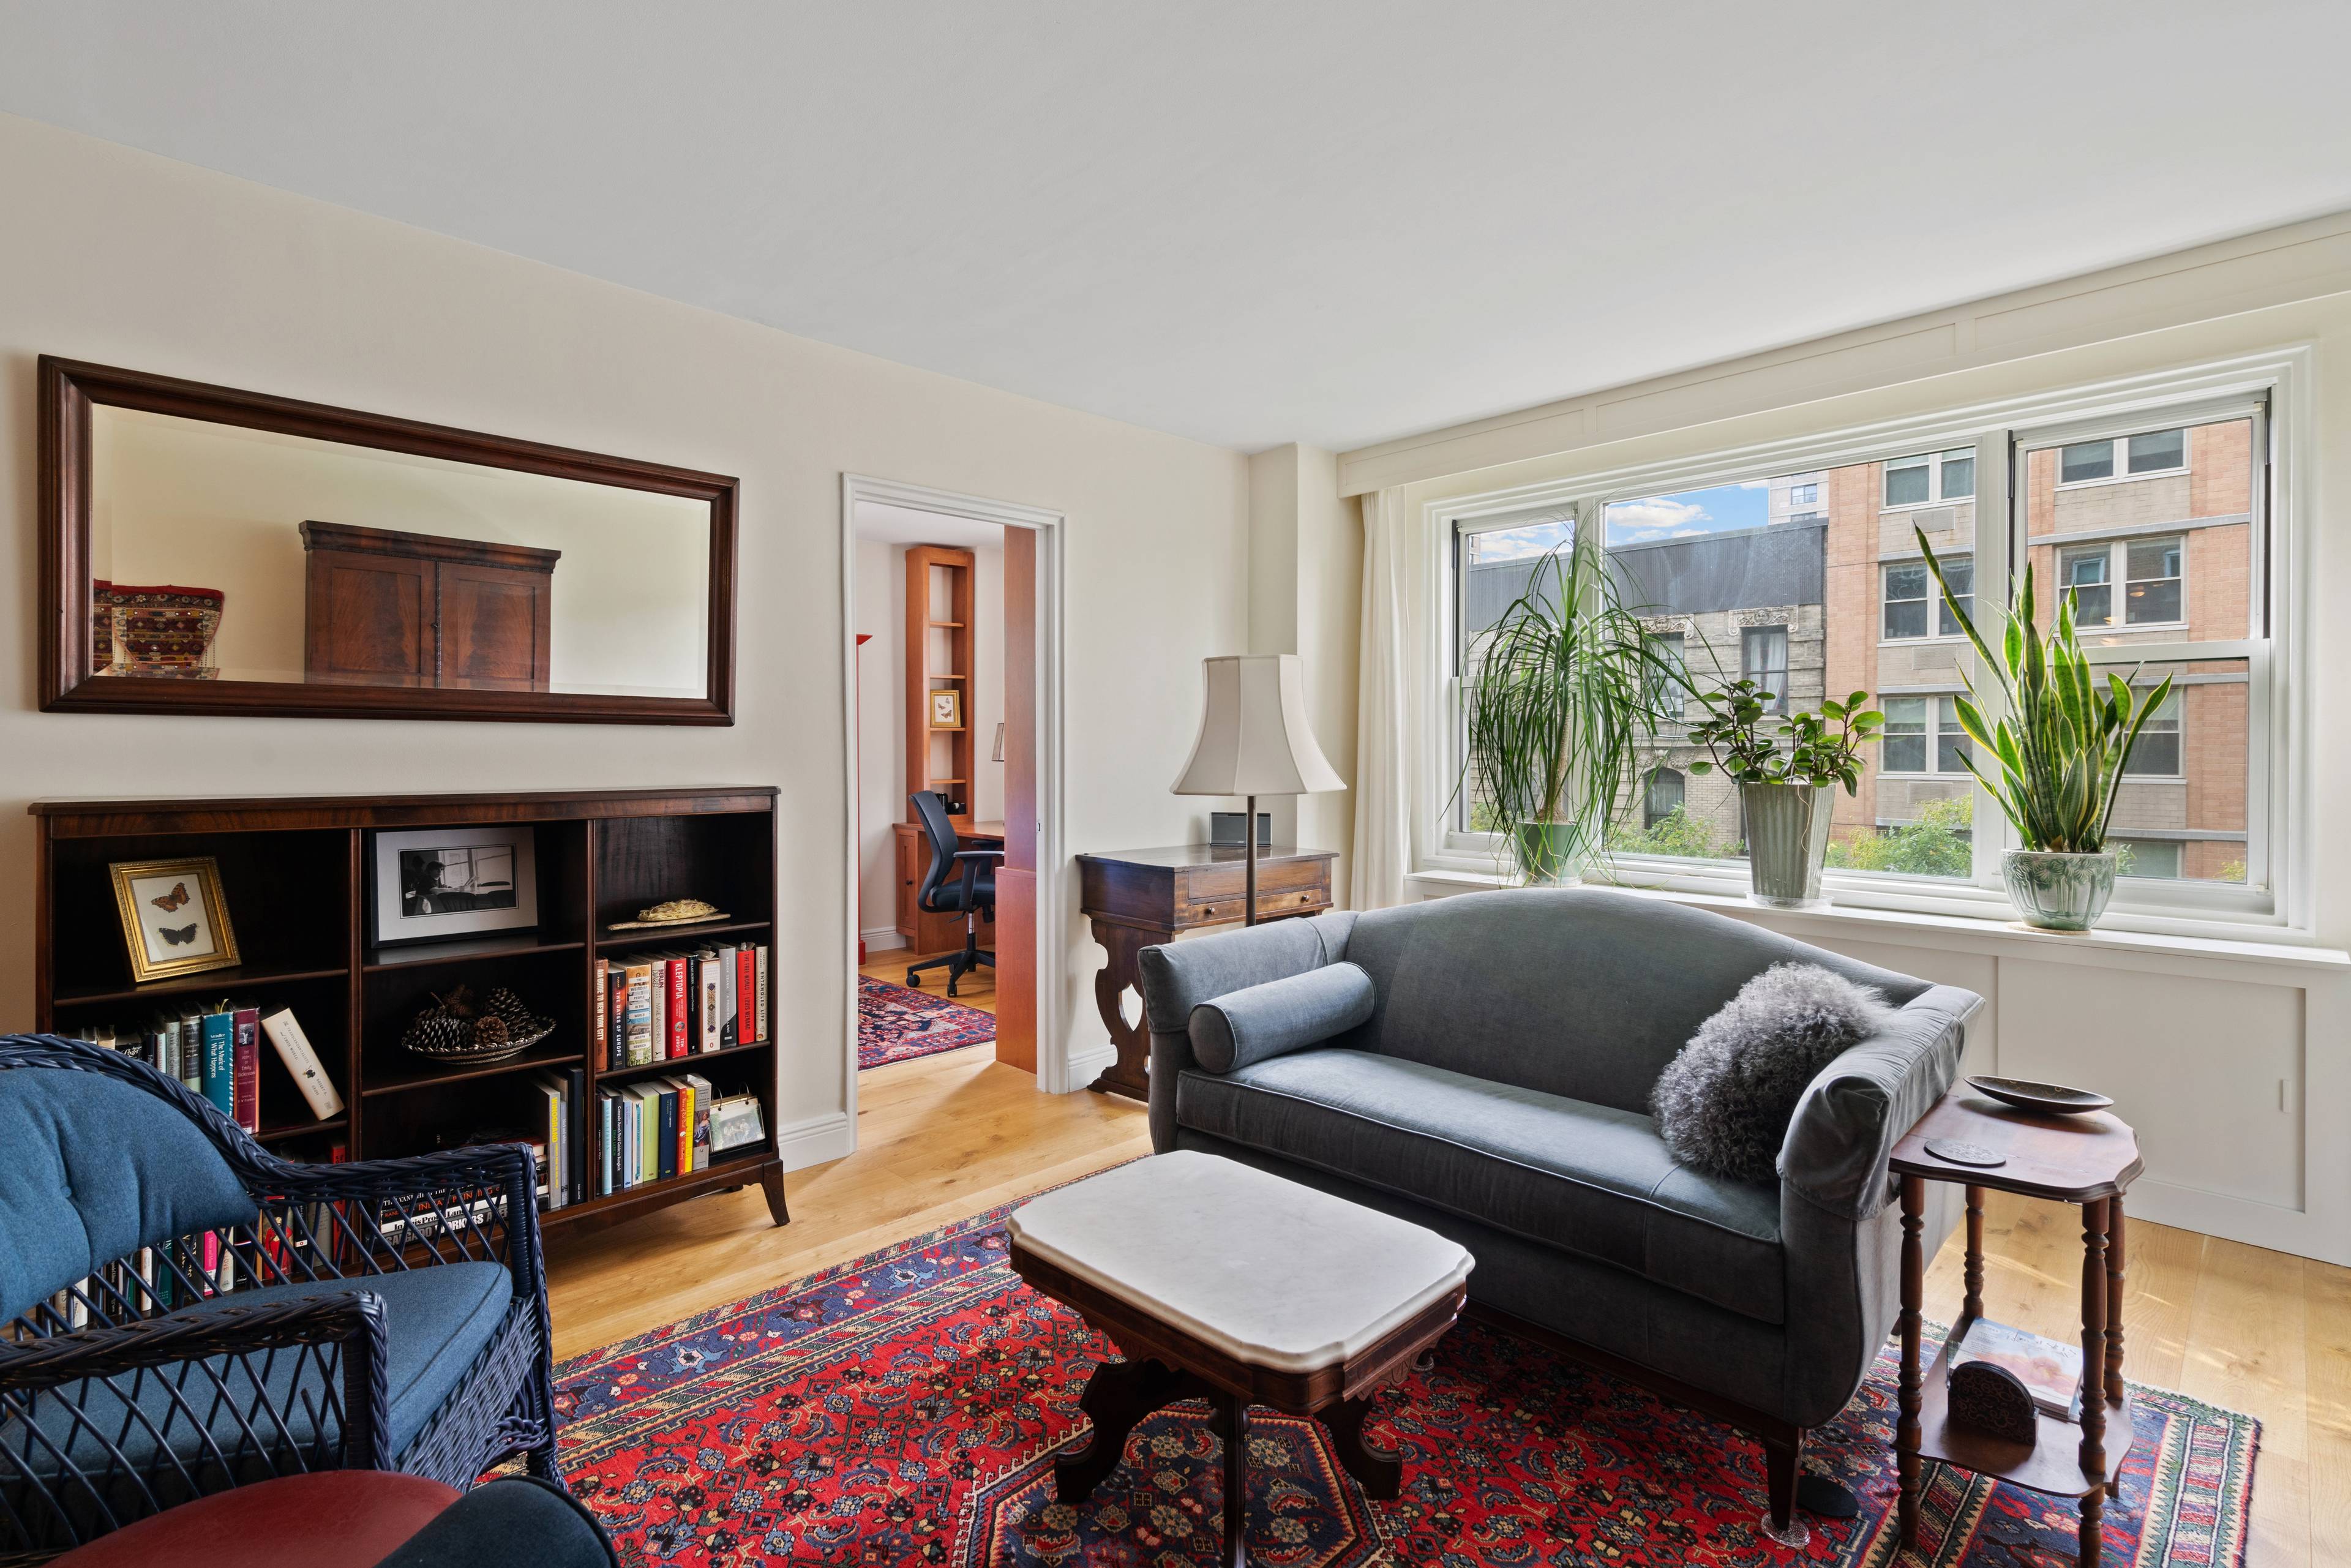 New Listing! South Facing 2 Bedroom in Upper Carnegie Hill - Museum Mile